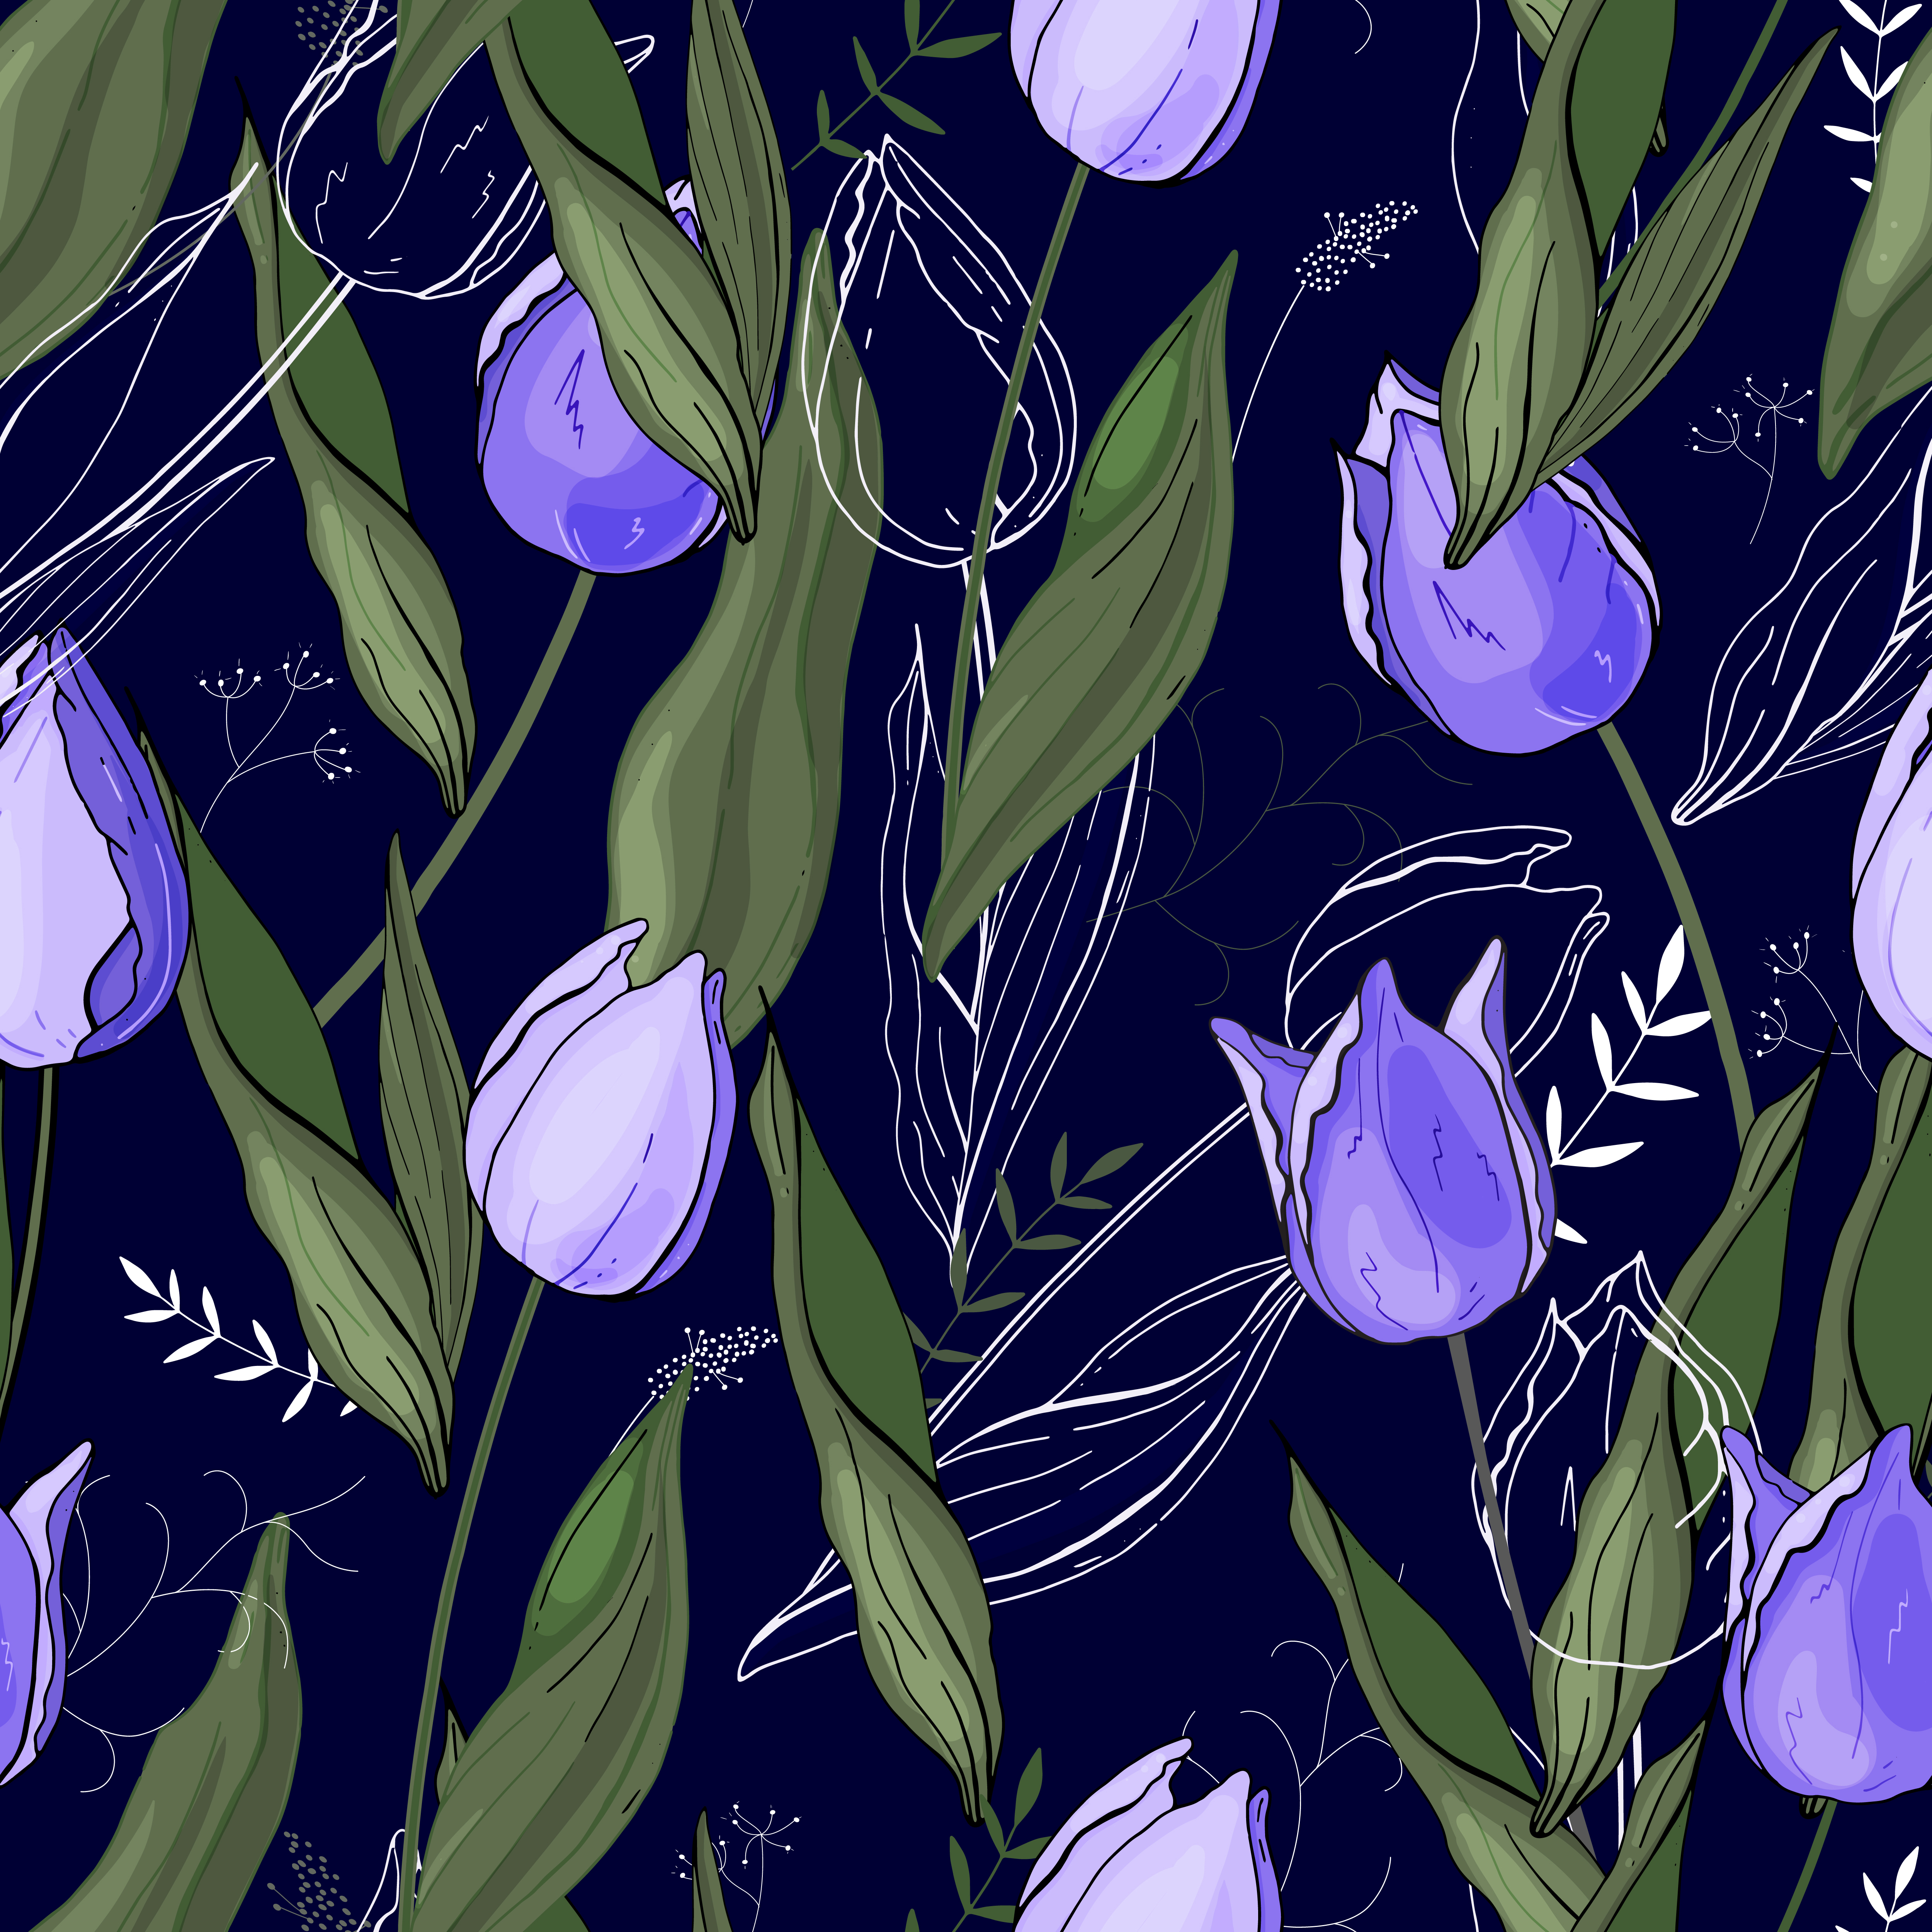 Tulips. Hand drawn style on background. Seamless vector texture. Floral pattern with  different kind of flowers.